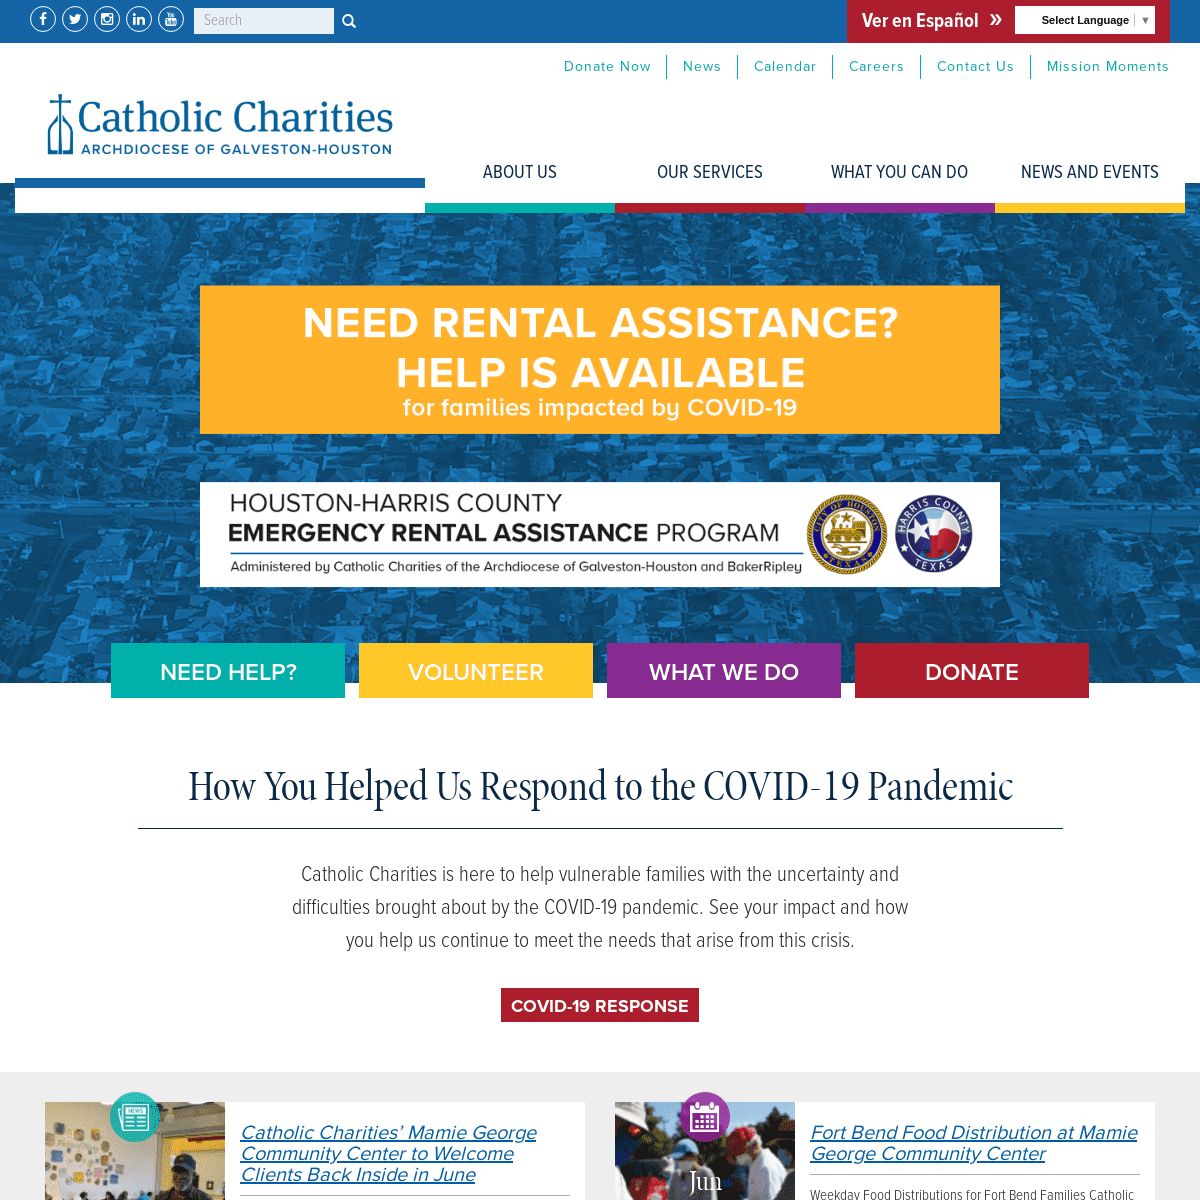 A complete backup of https://catholiccharities.org